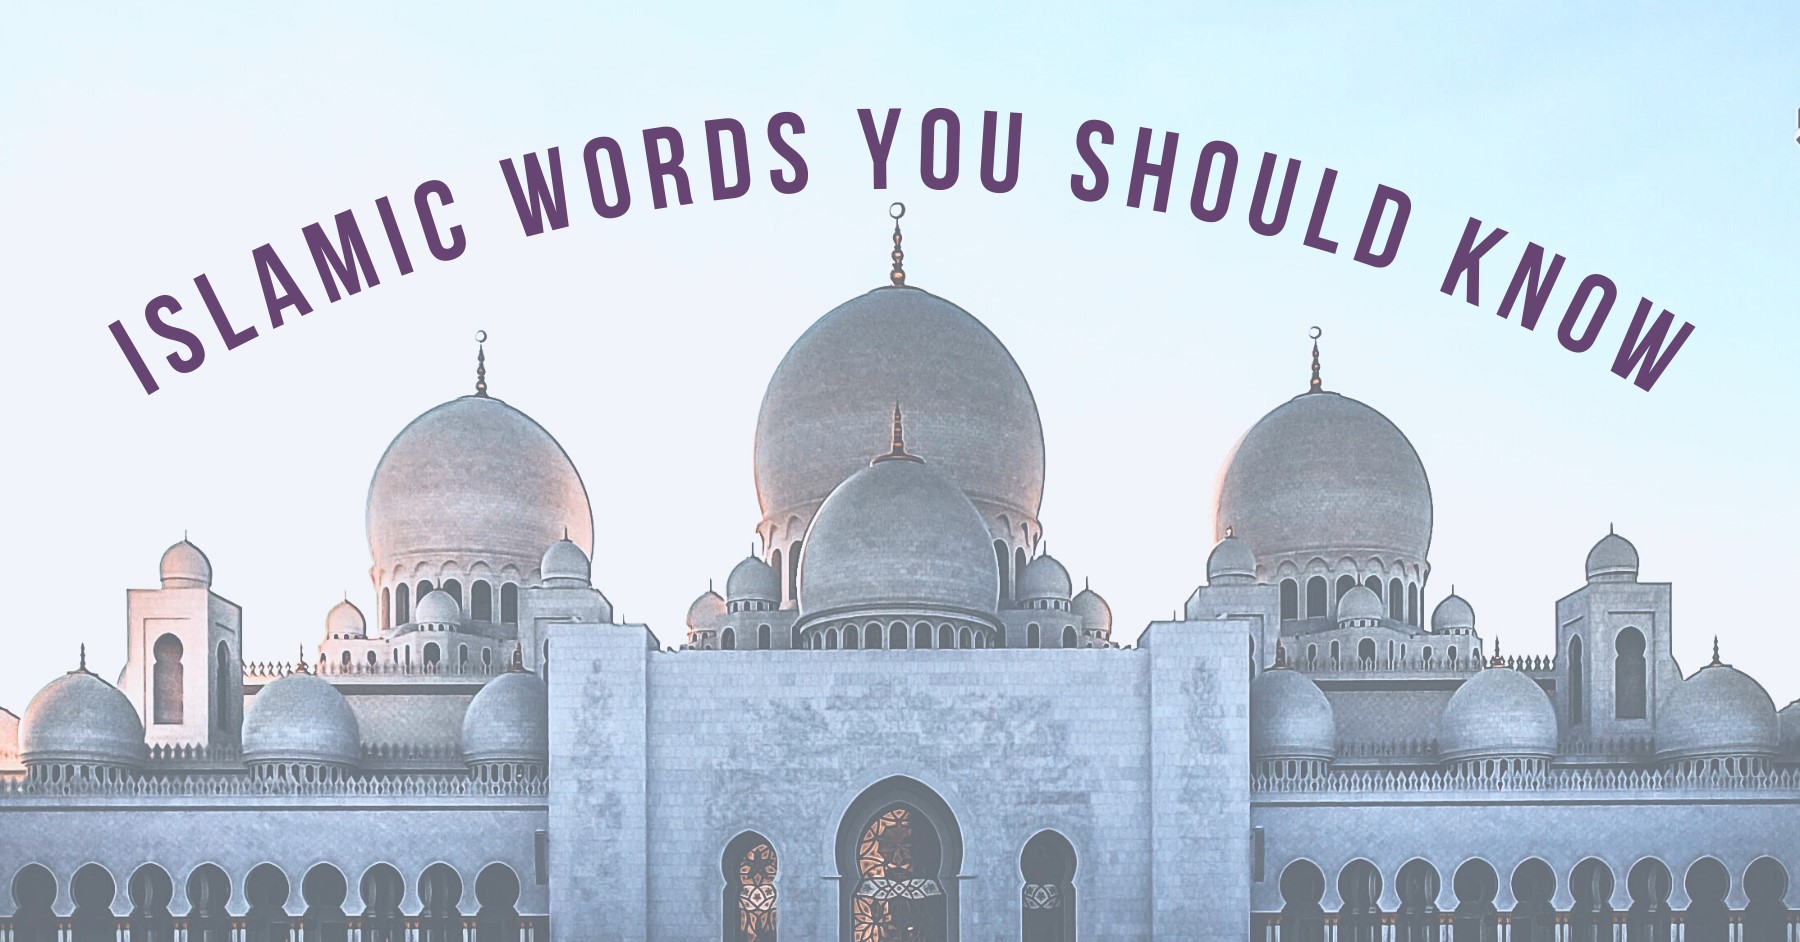 Islamic Words You Should Know